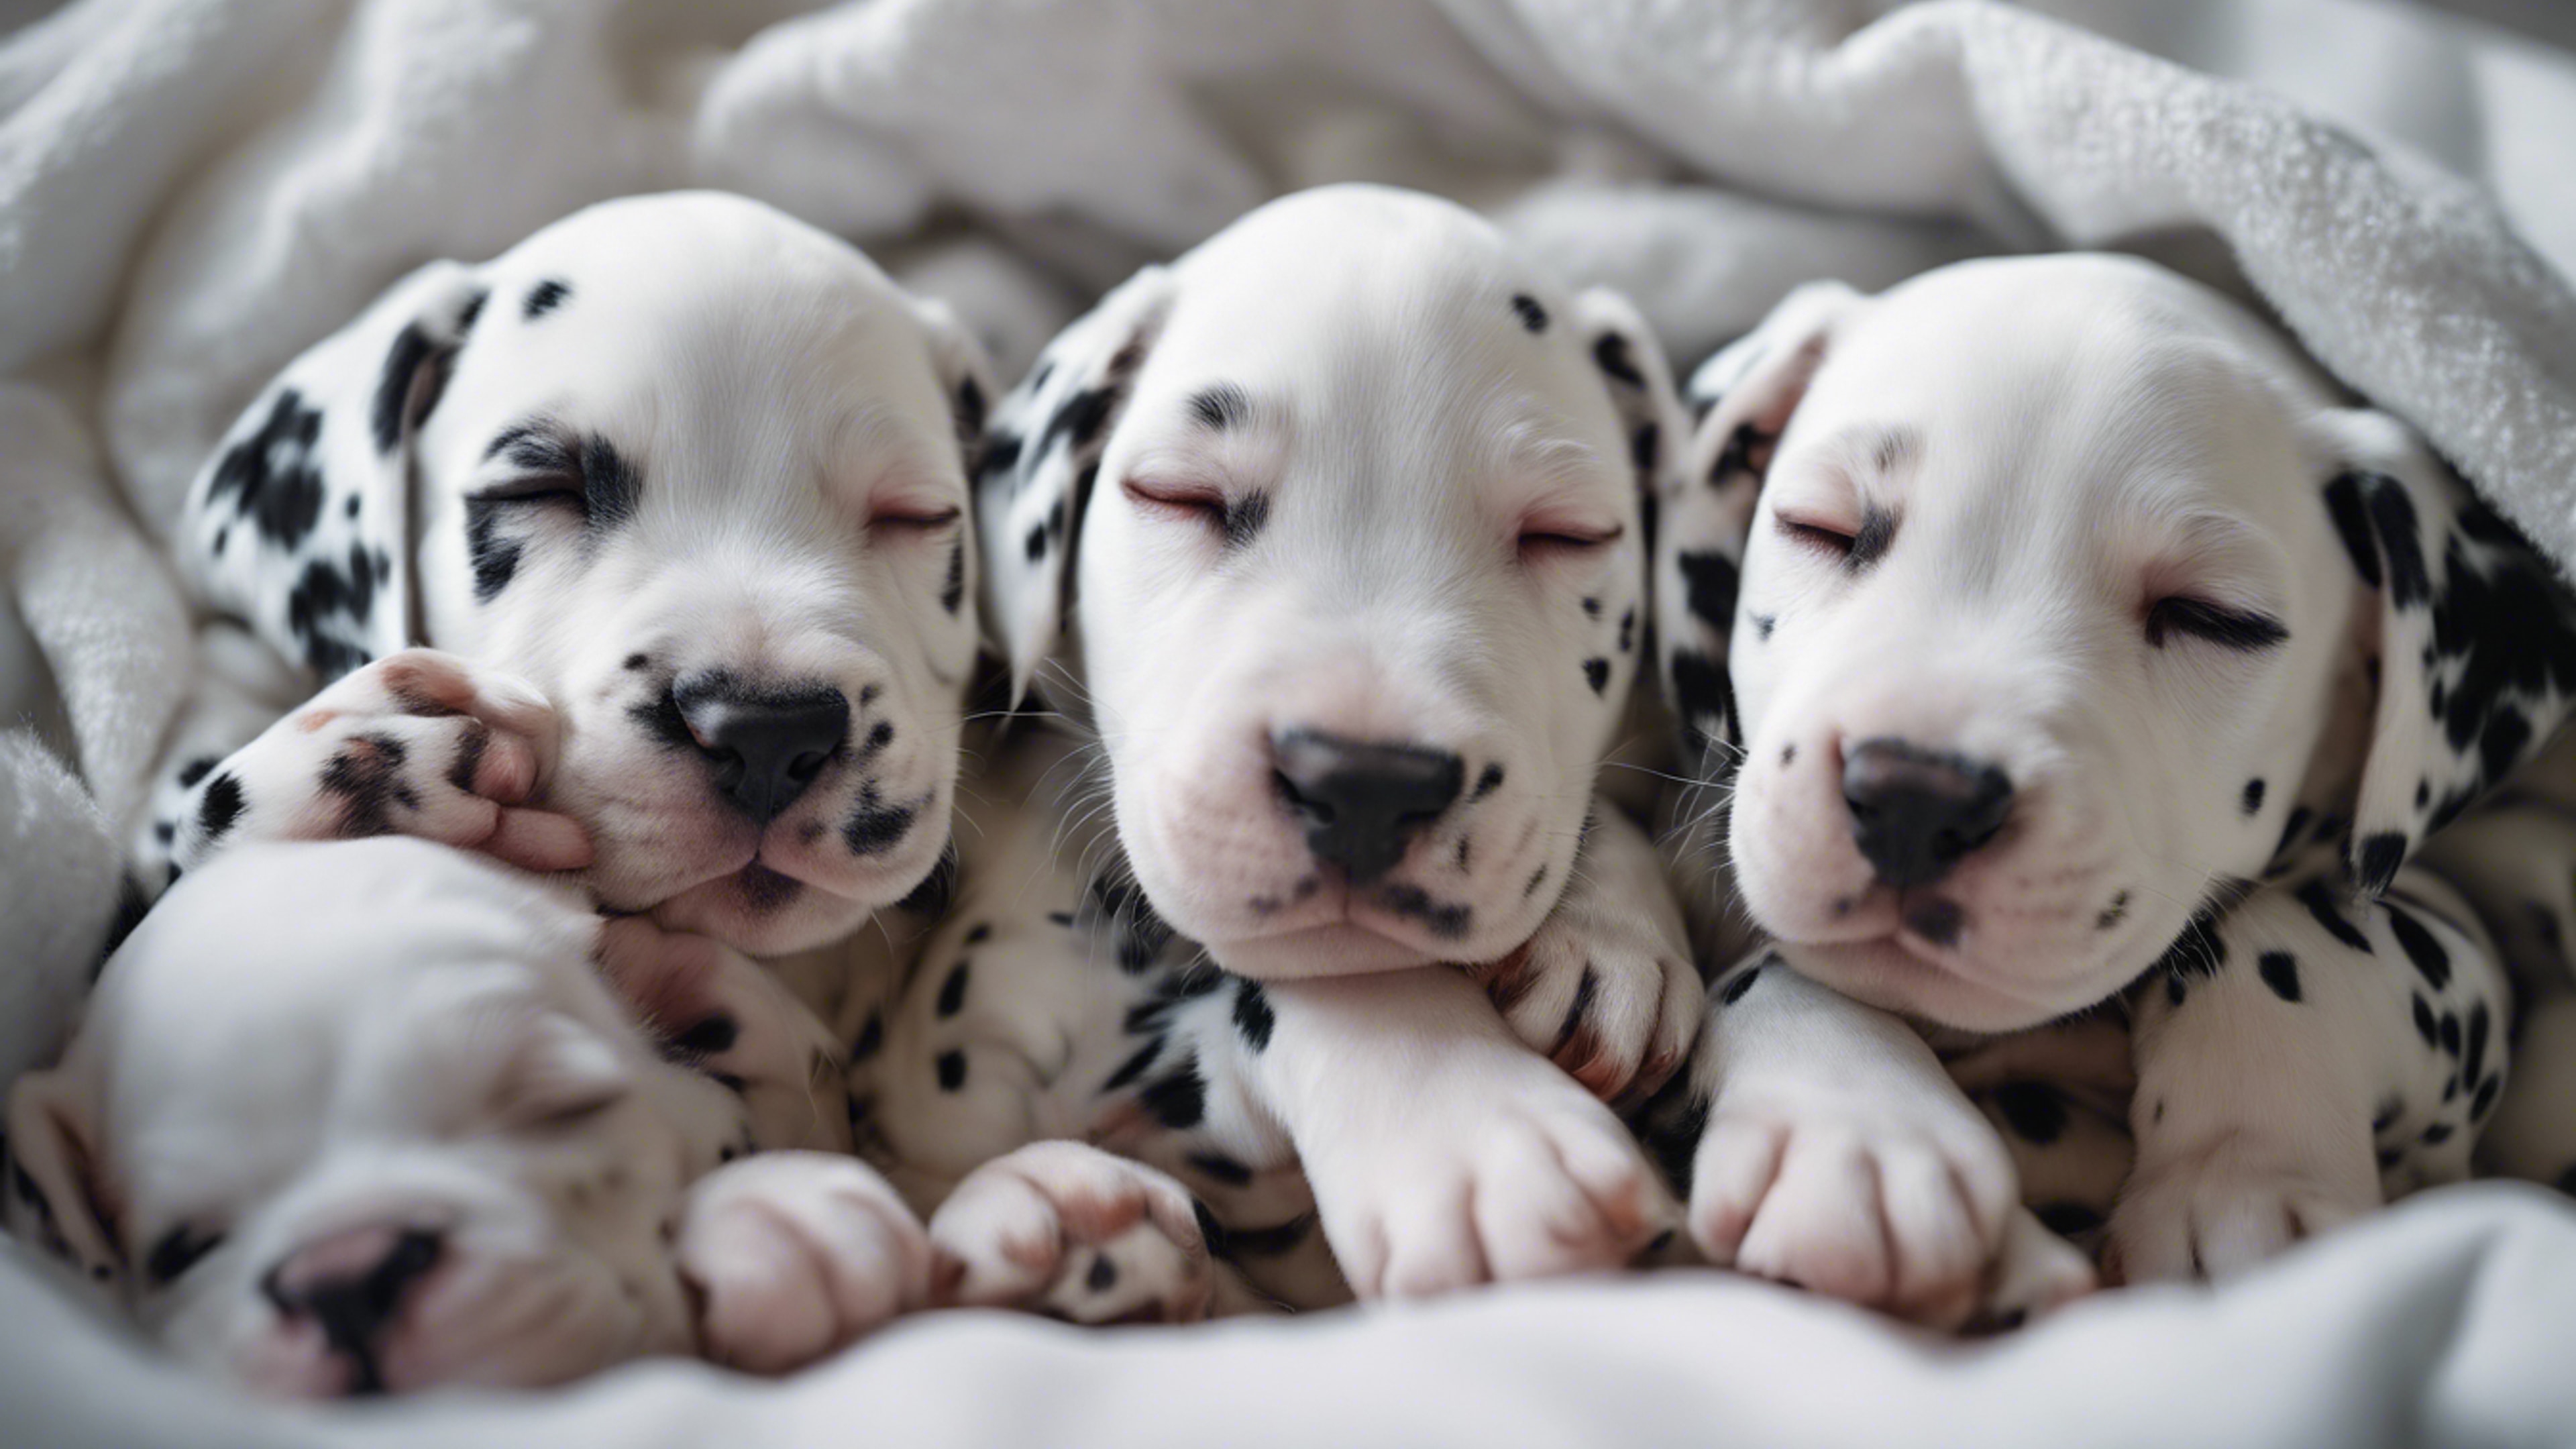 A cluster of sleeping Dalmatian puppies under a cozy white blanket in a nursery room. Tapeta[4a5dc312c1f344509ca9]